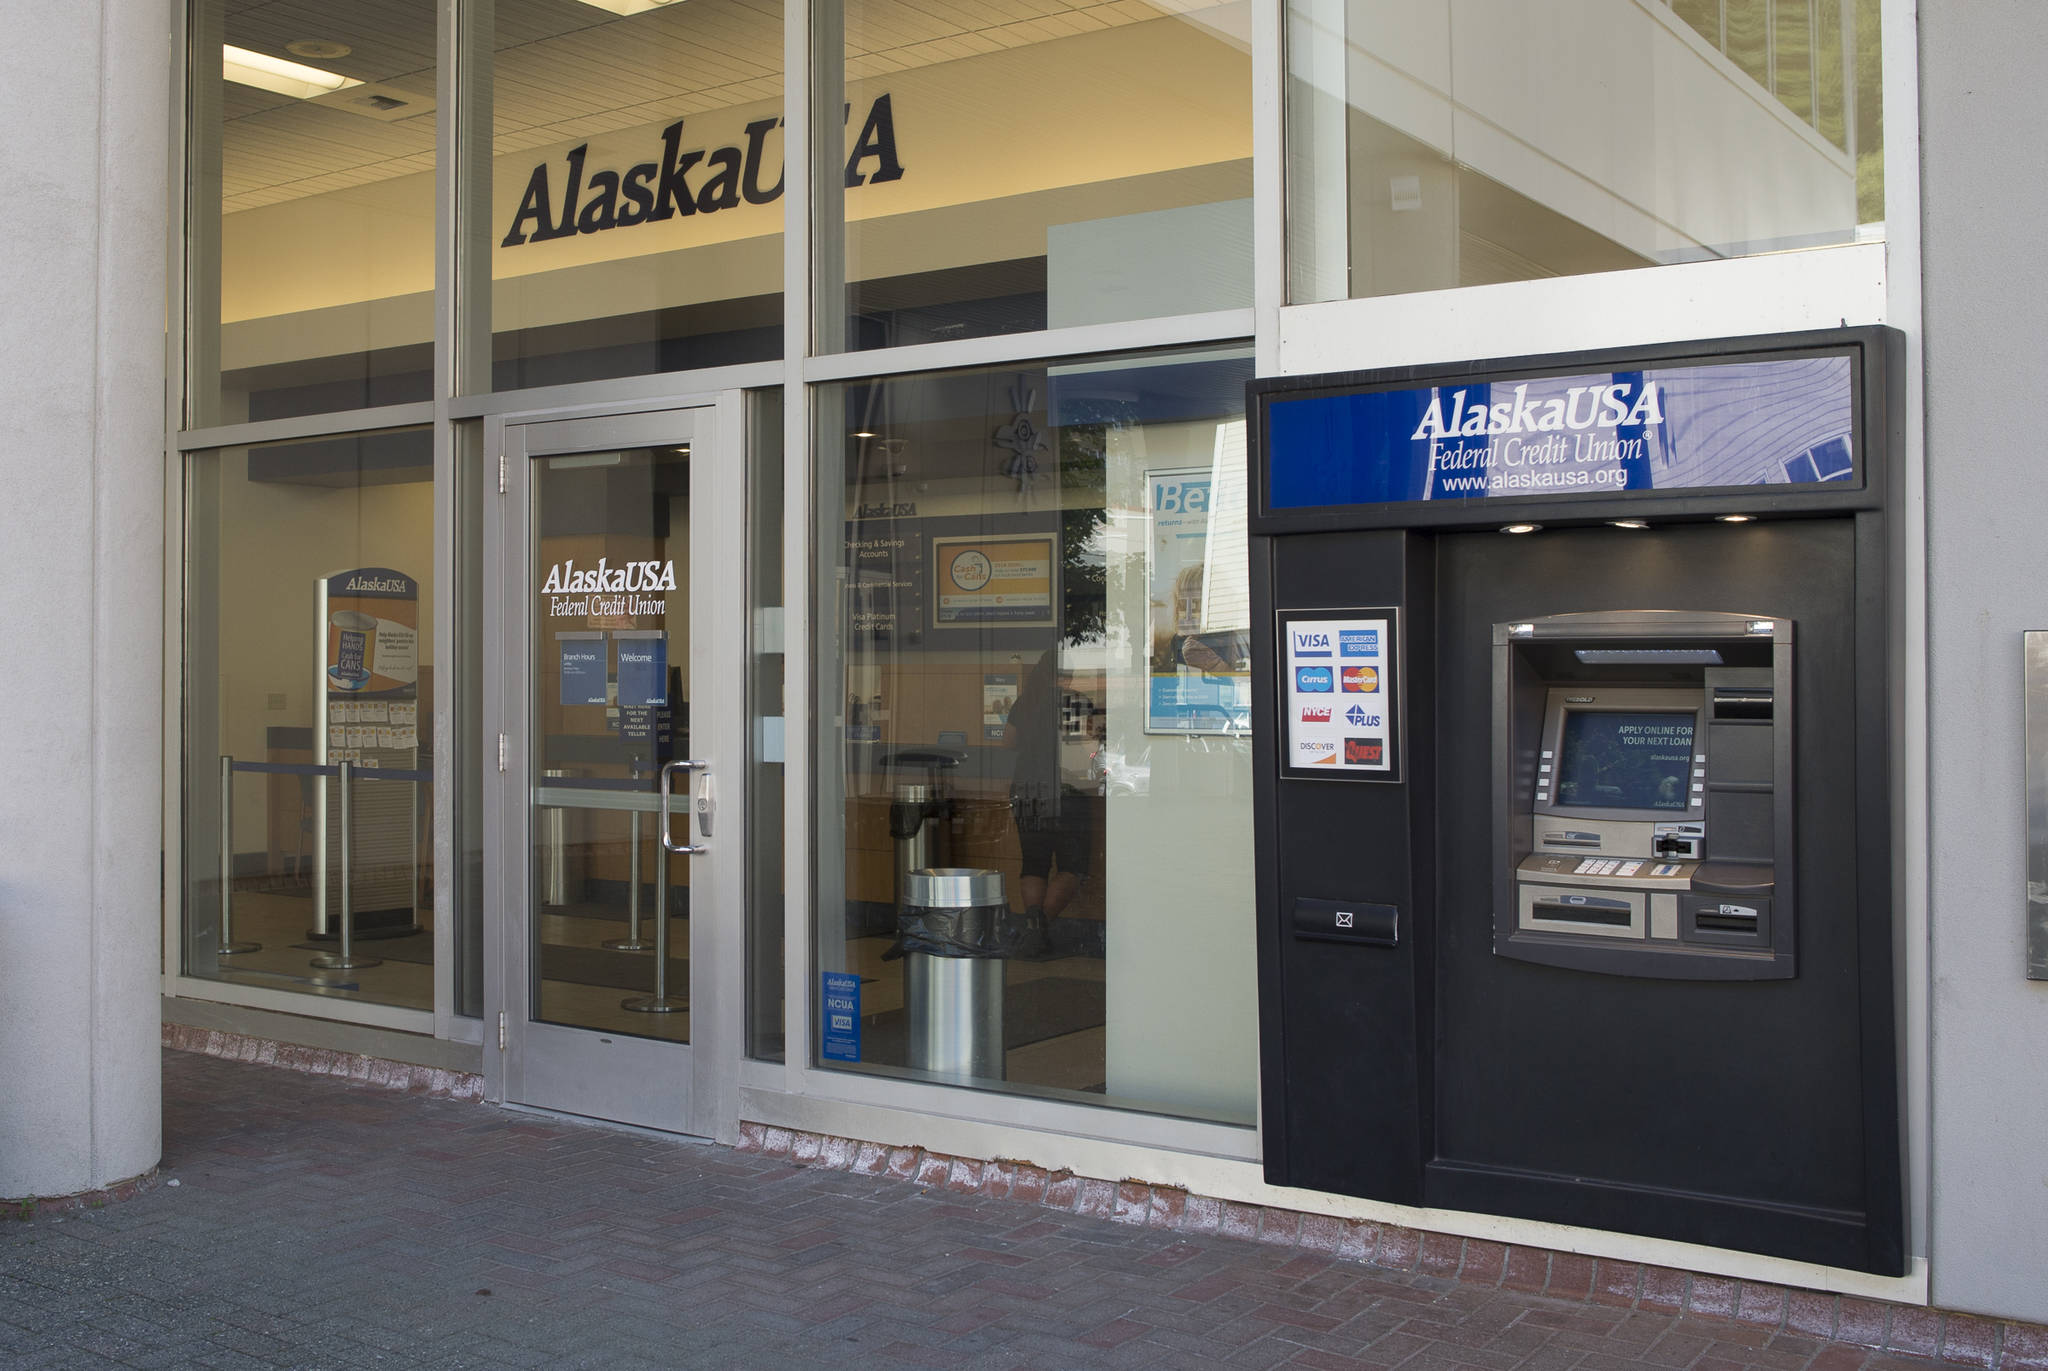 The Alaska USA Federal Credit Union will be closing its office in the Sealaska Building. (Michael Penn | Juneau Empire)